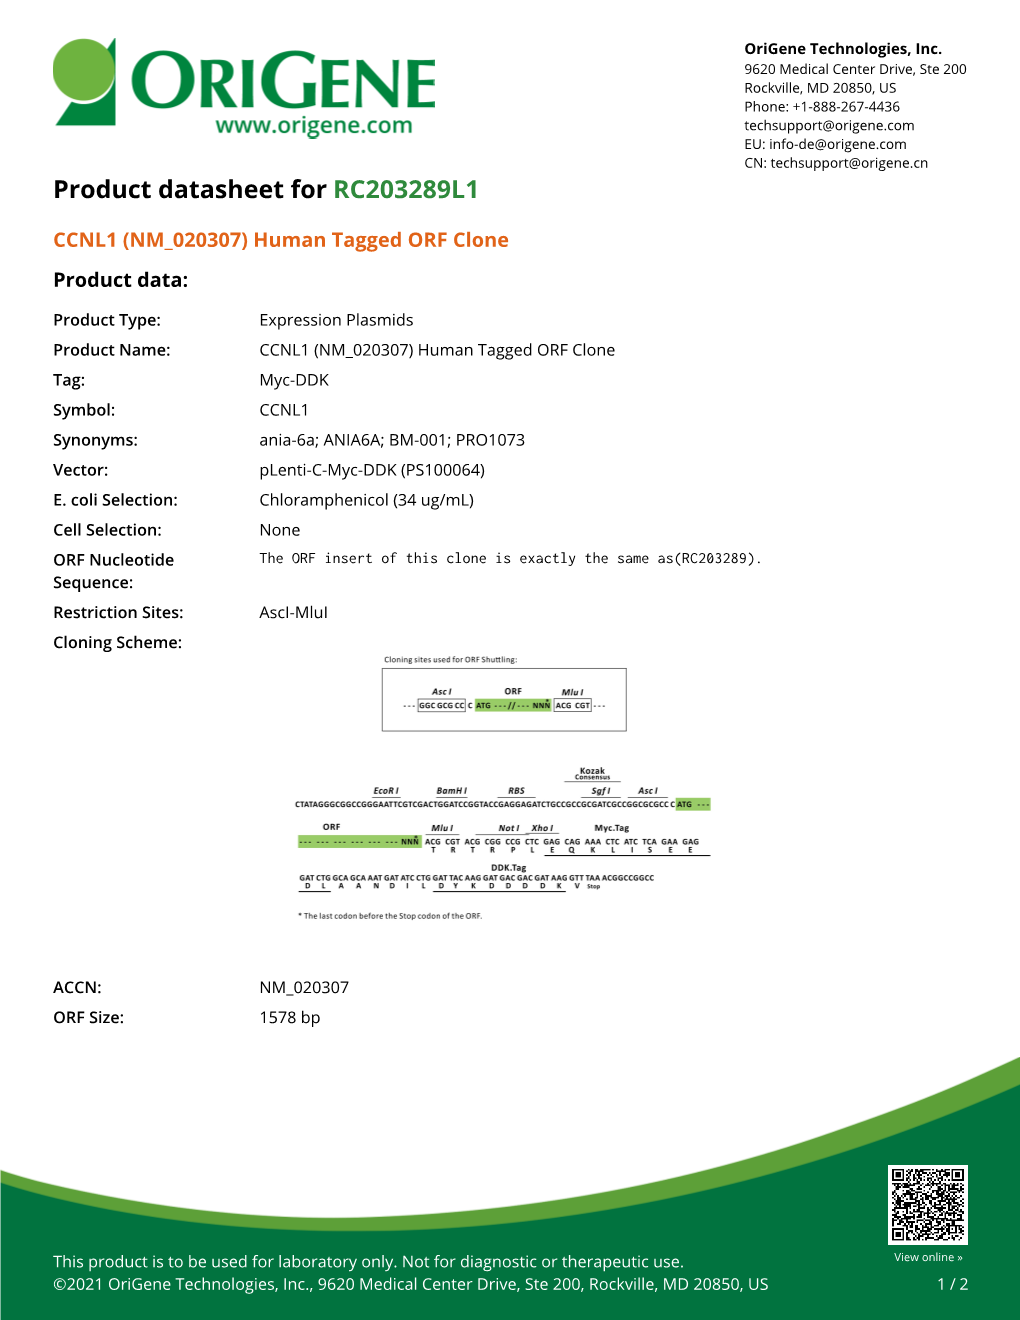 CCNL1 (NM 020307) Human Tagged ORF Clone Product Data